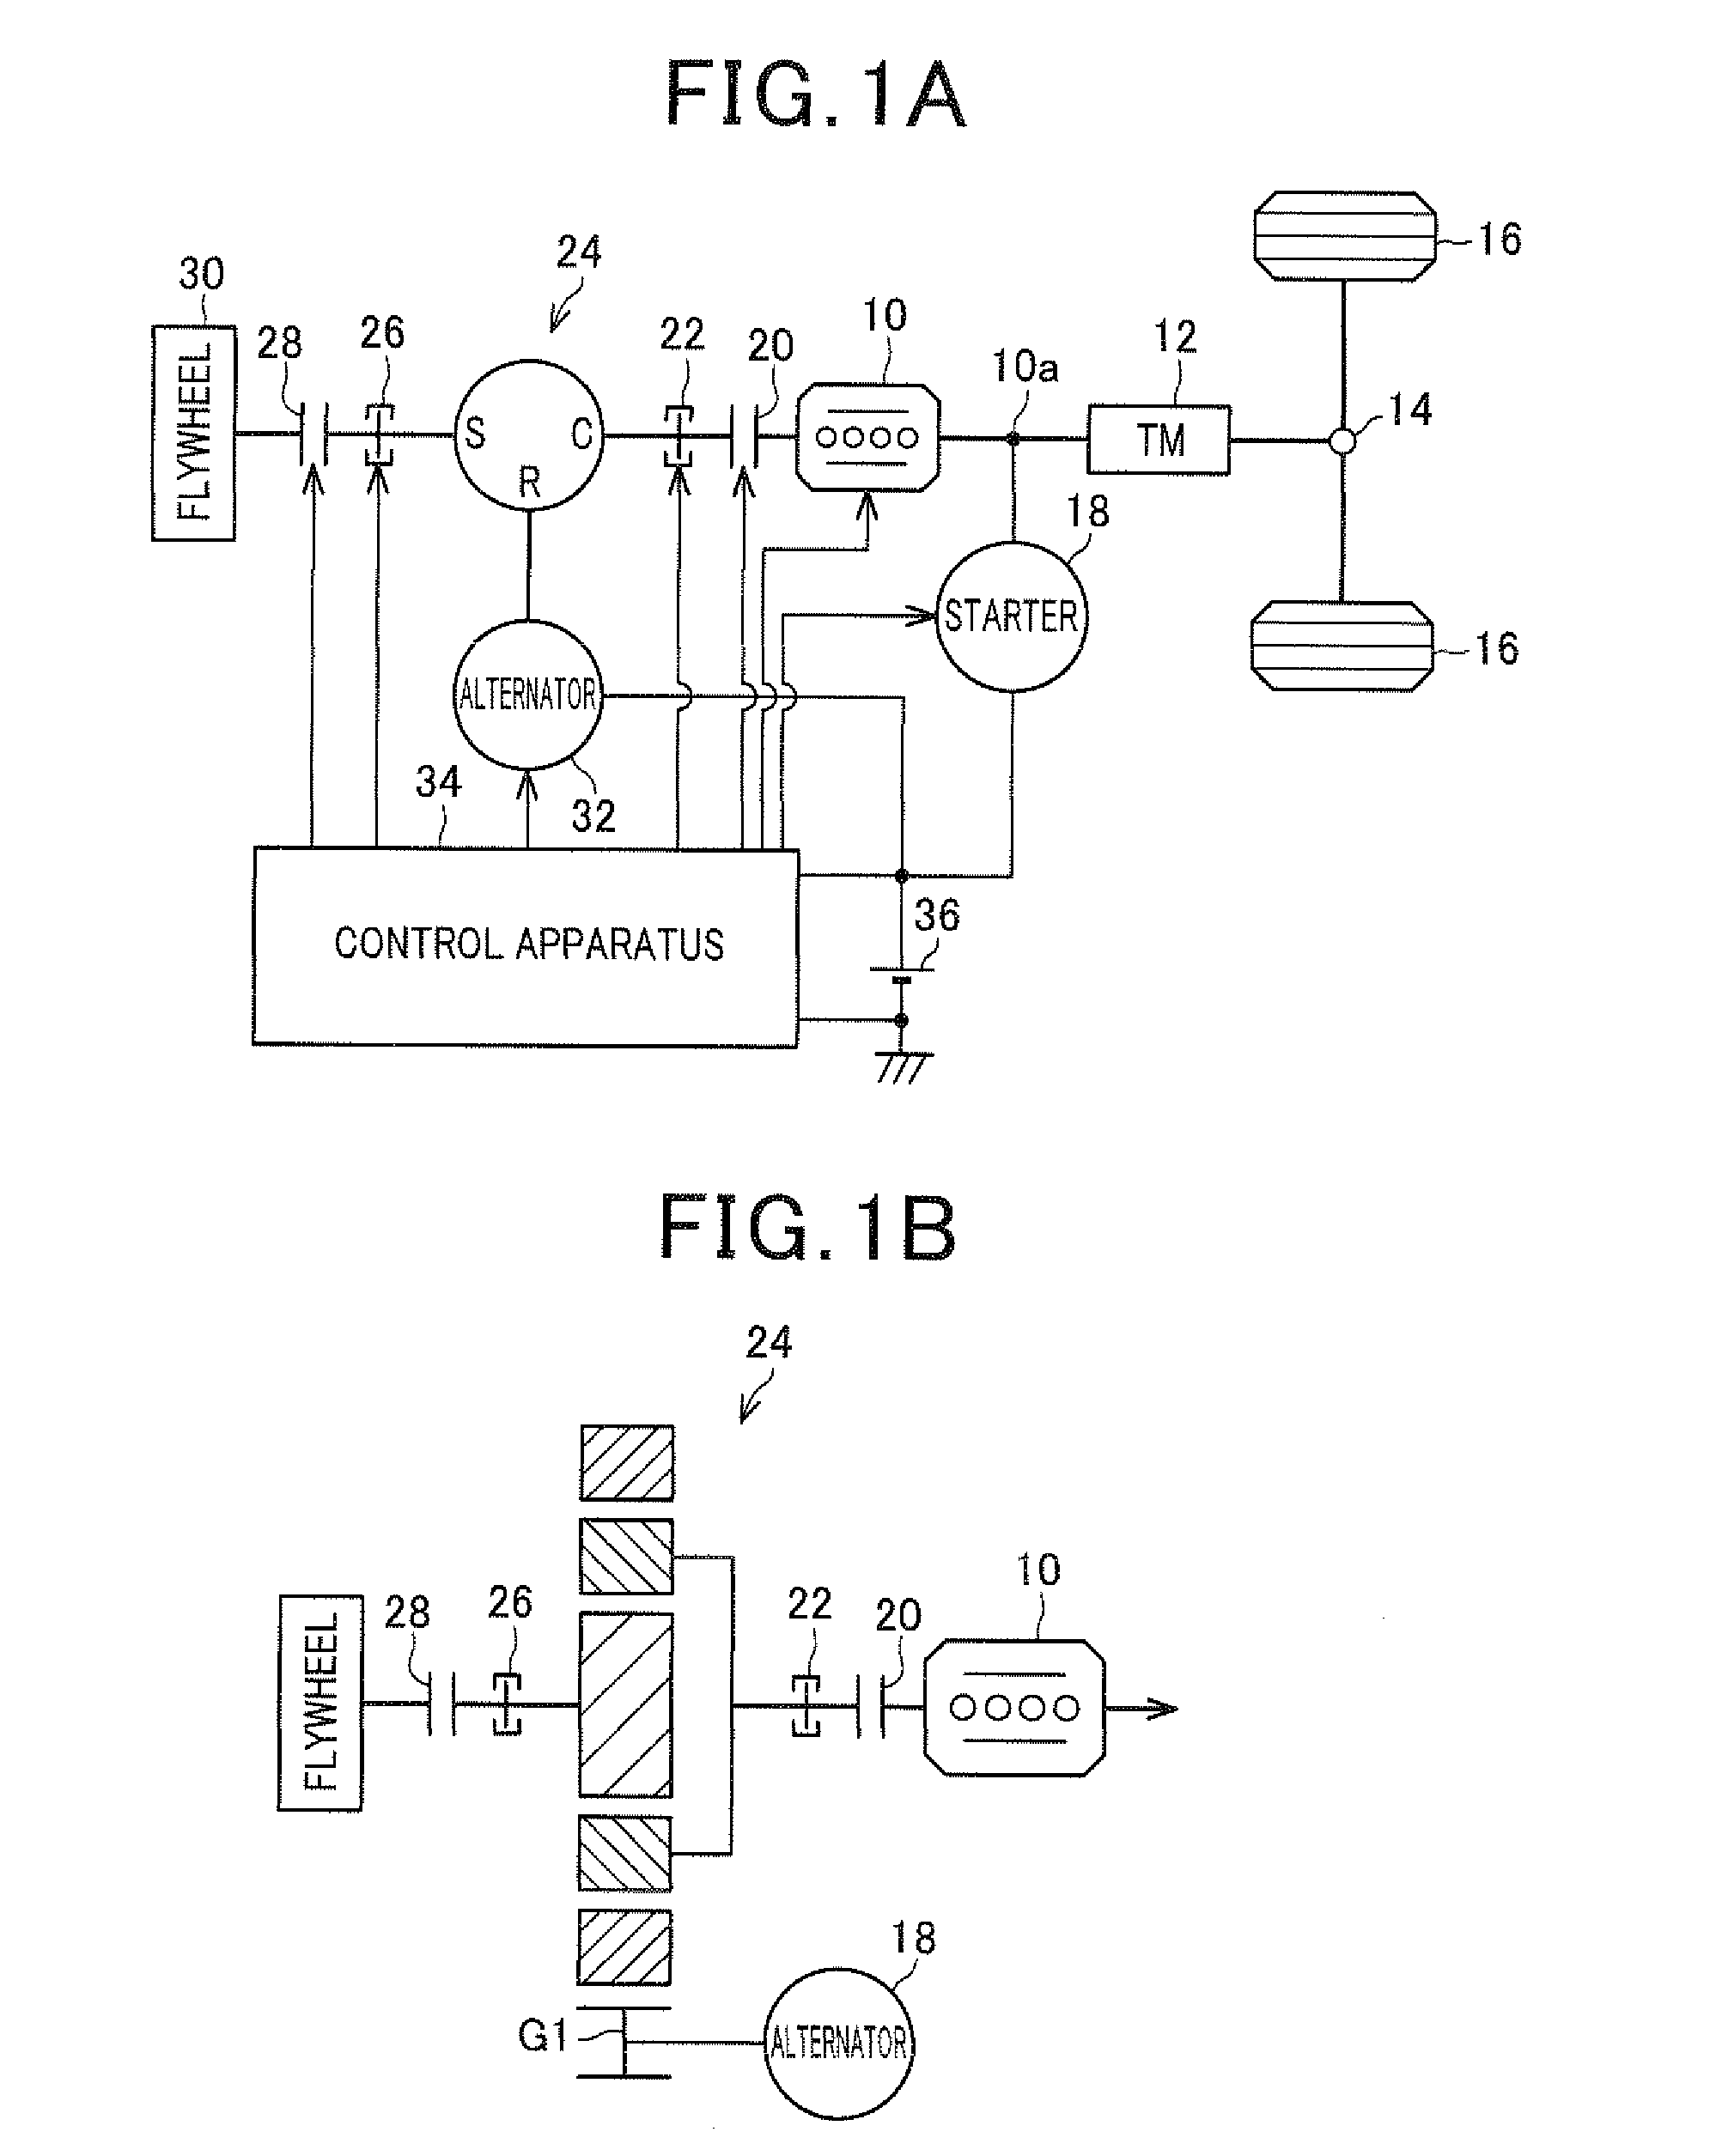 Power transmission system for use in vehicle